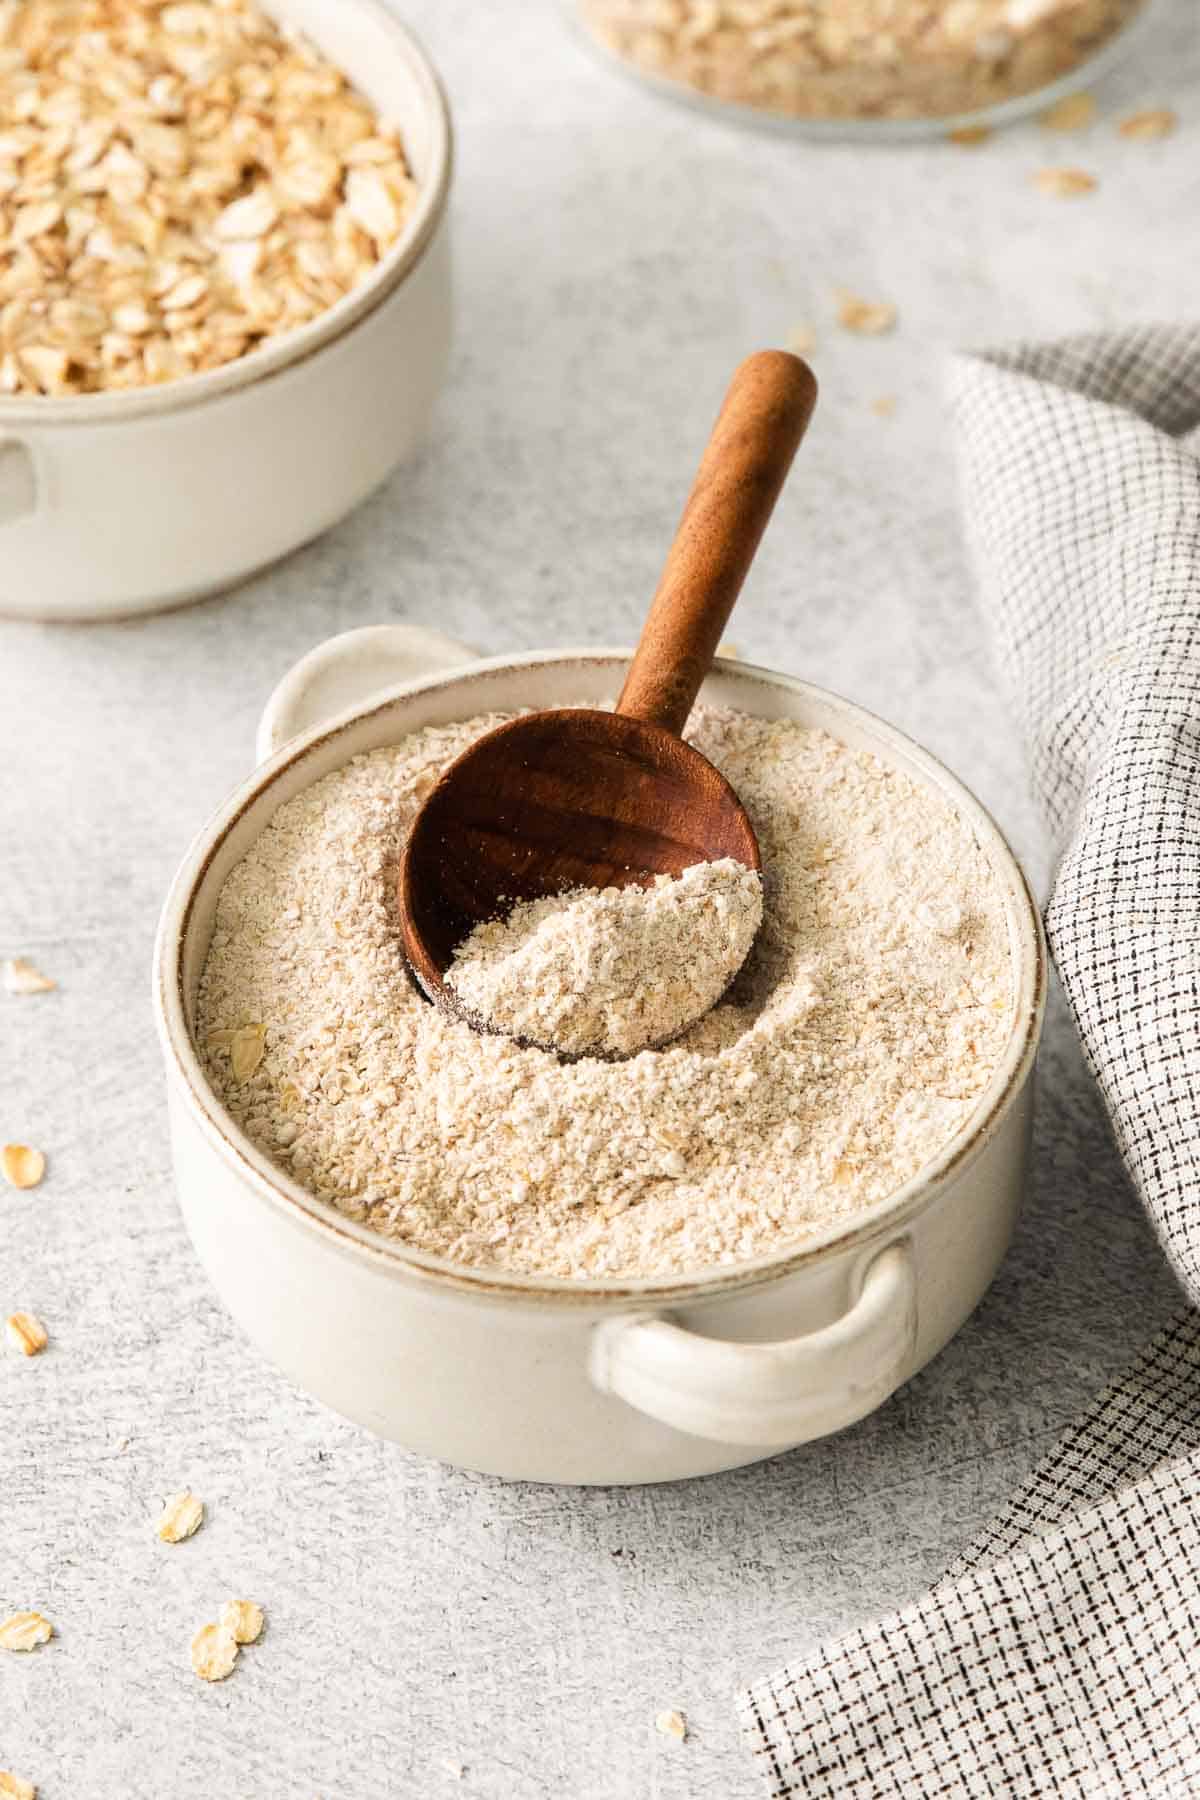 Gluten-free oat flour in a bowl with a wooden spoon in it